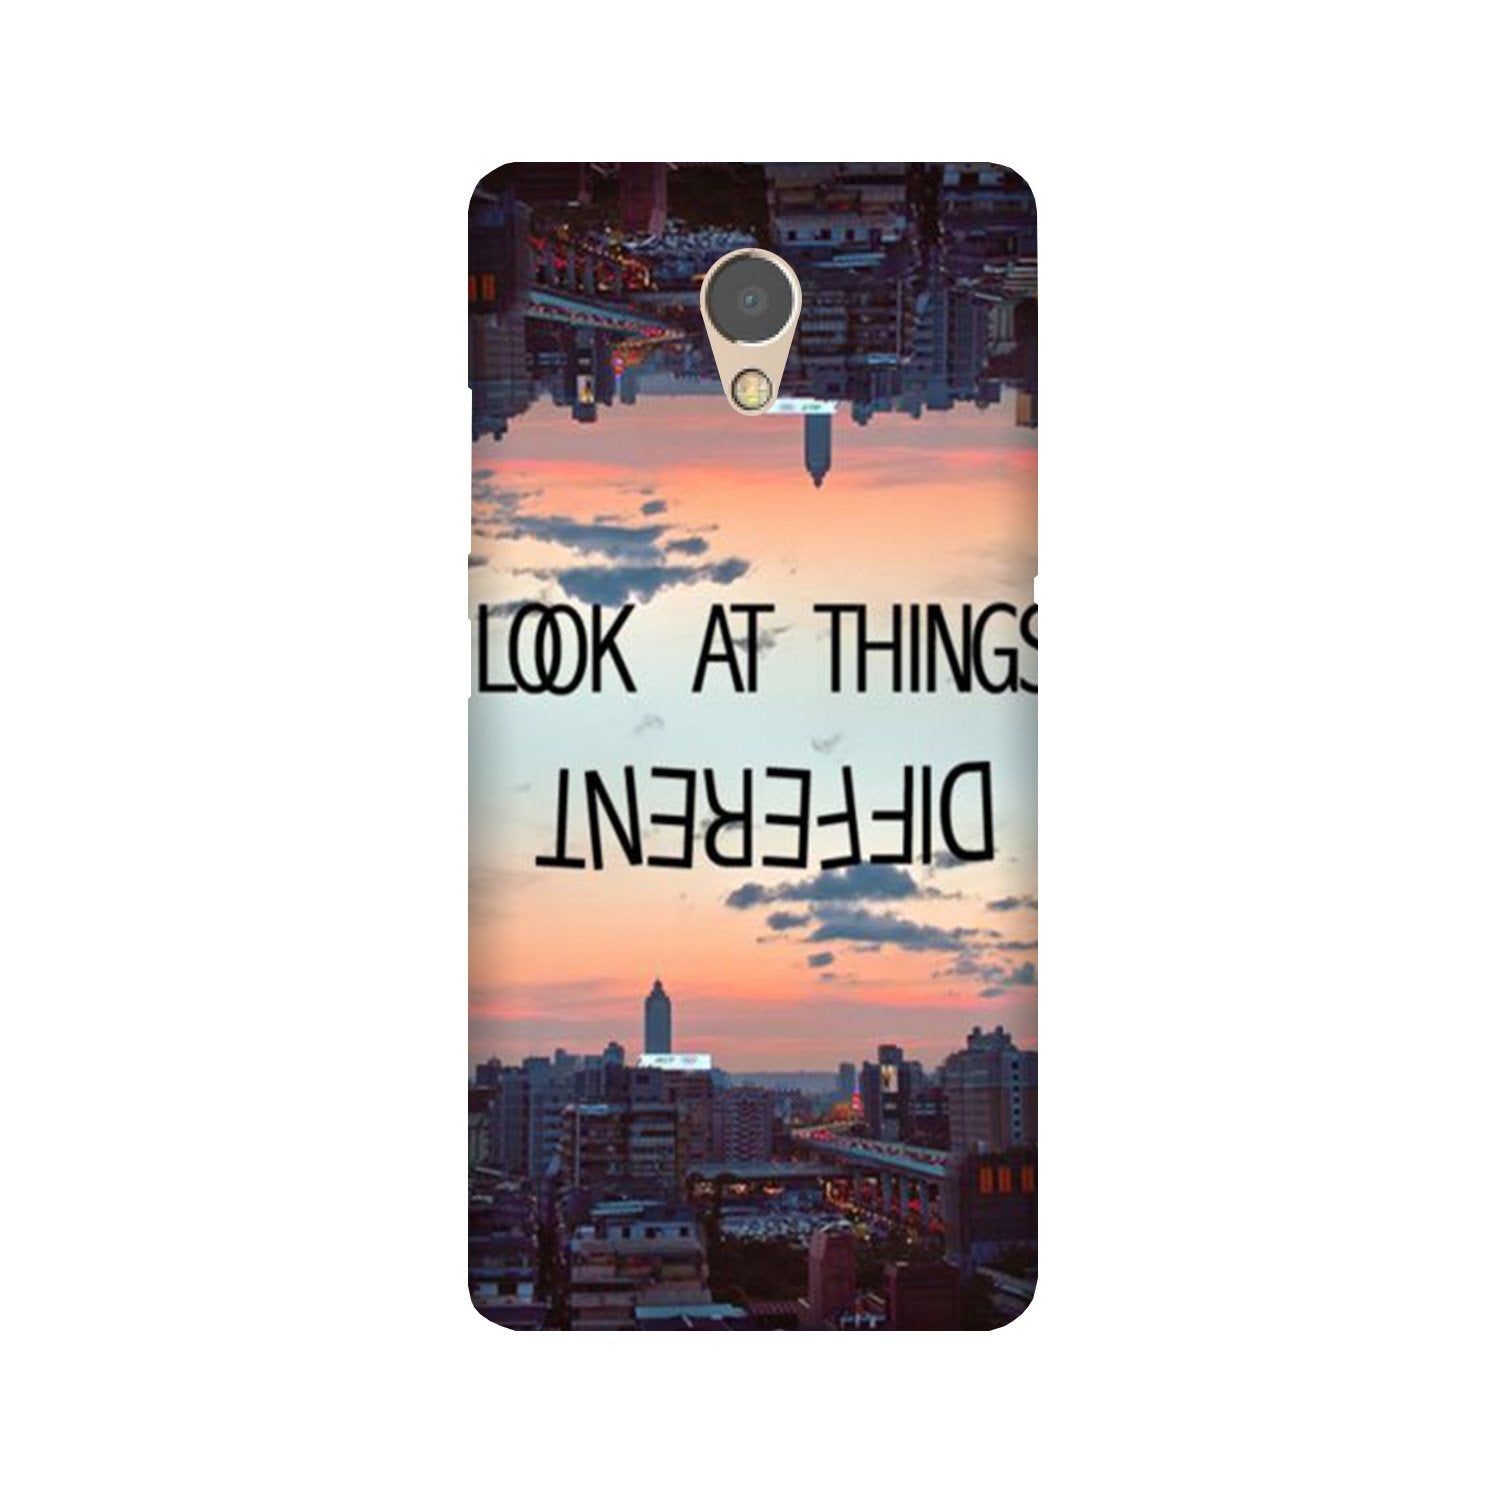 Look at things different Case for Lenovo P2